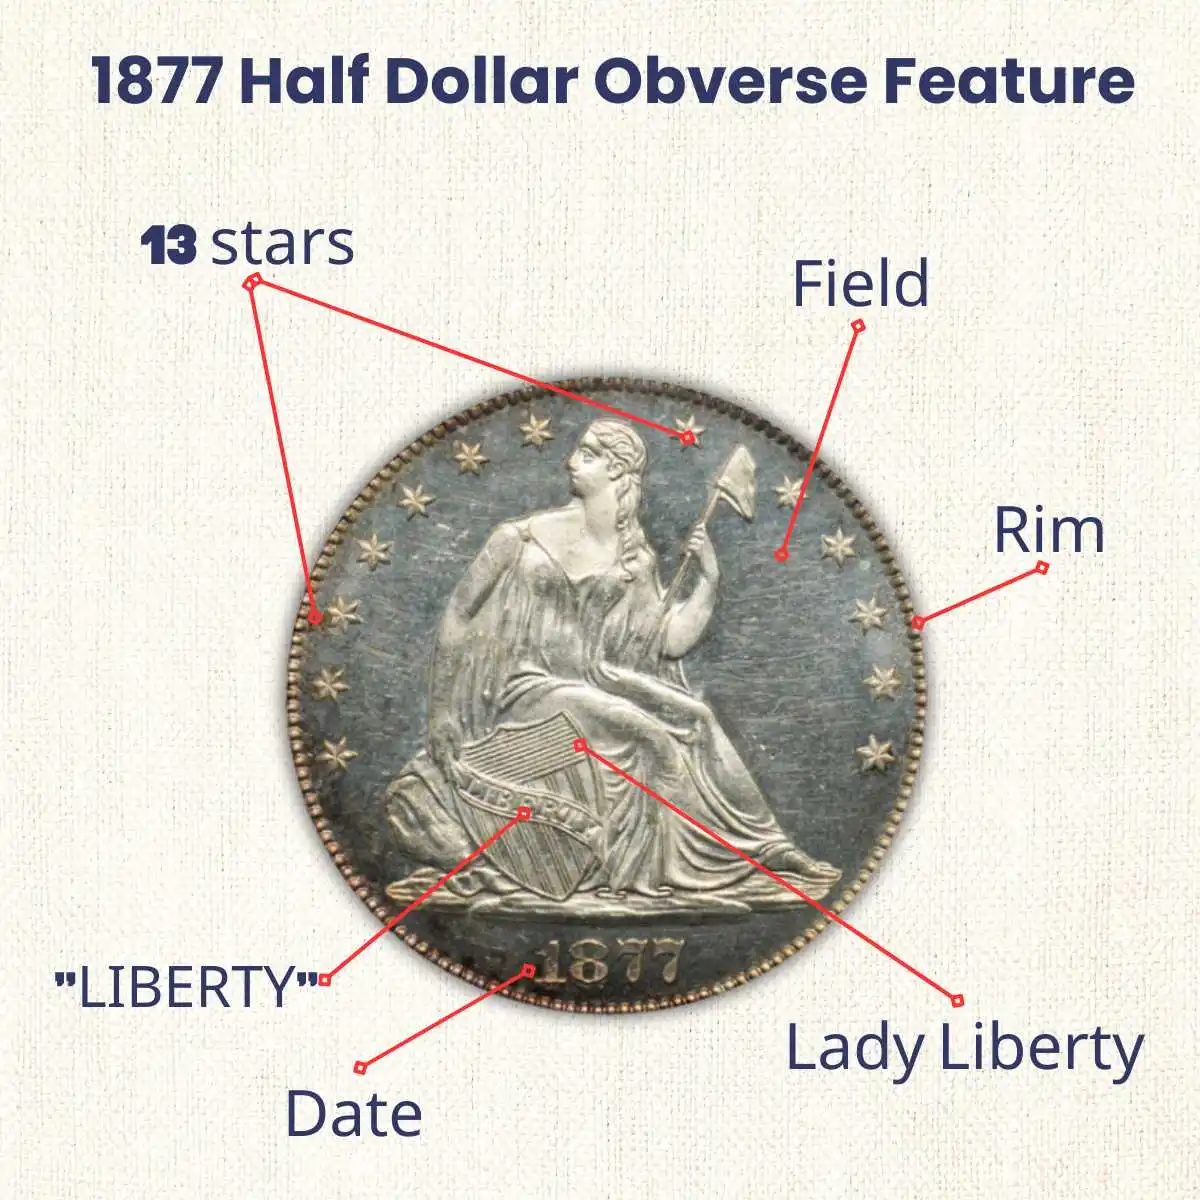 1877 Half Dollar Obverse Design and Features